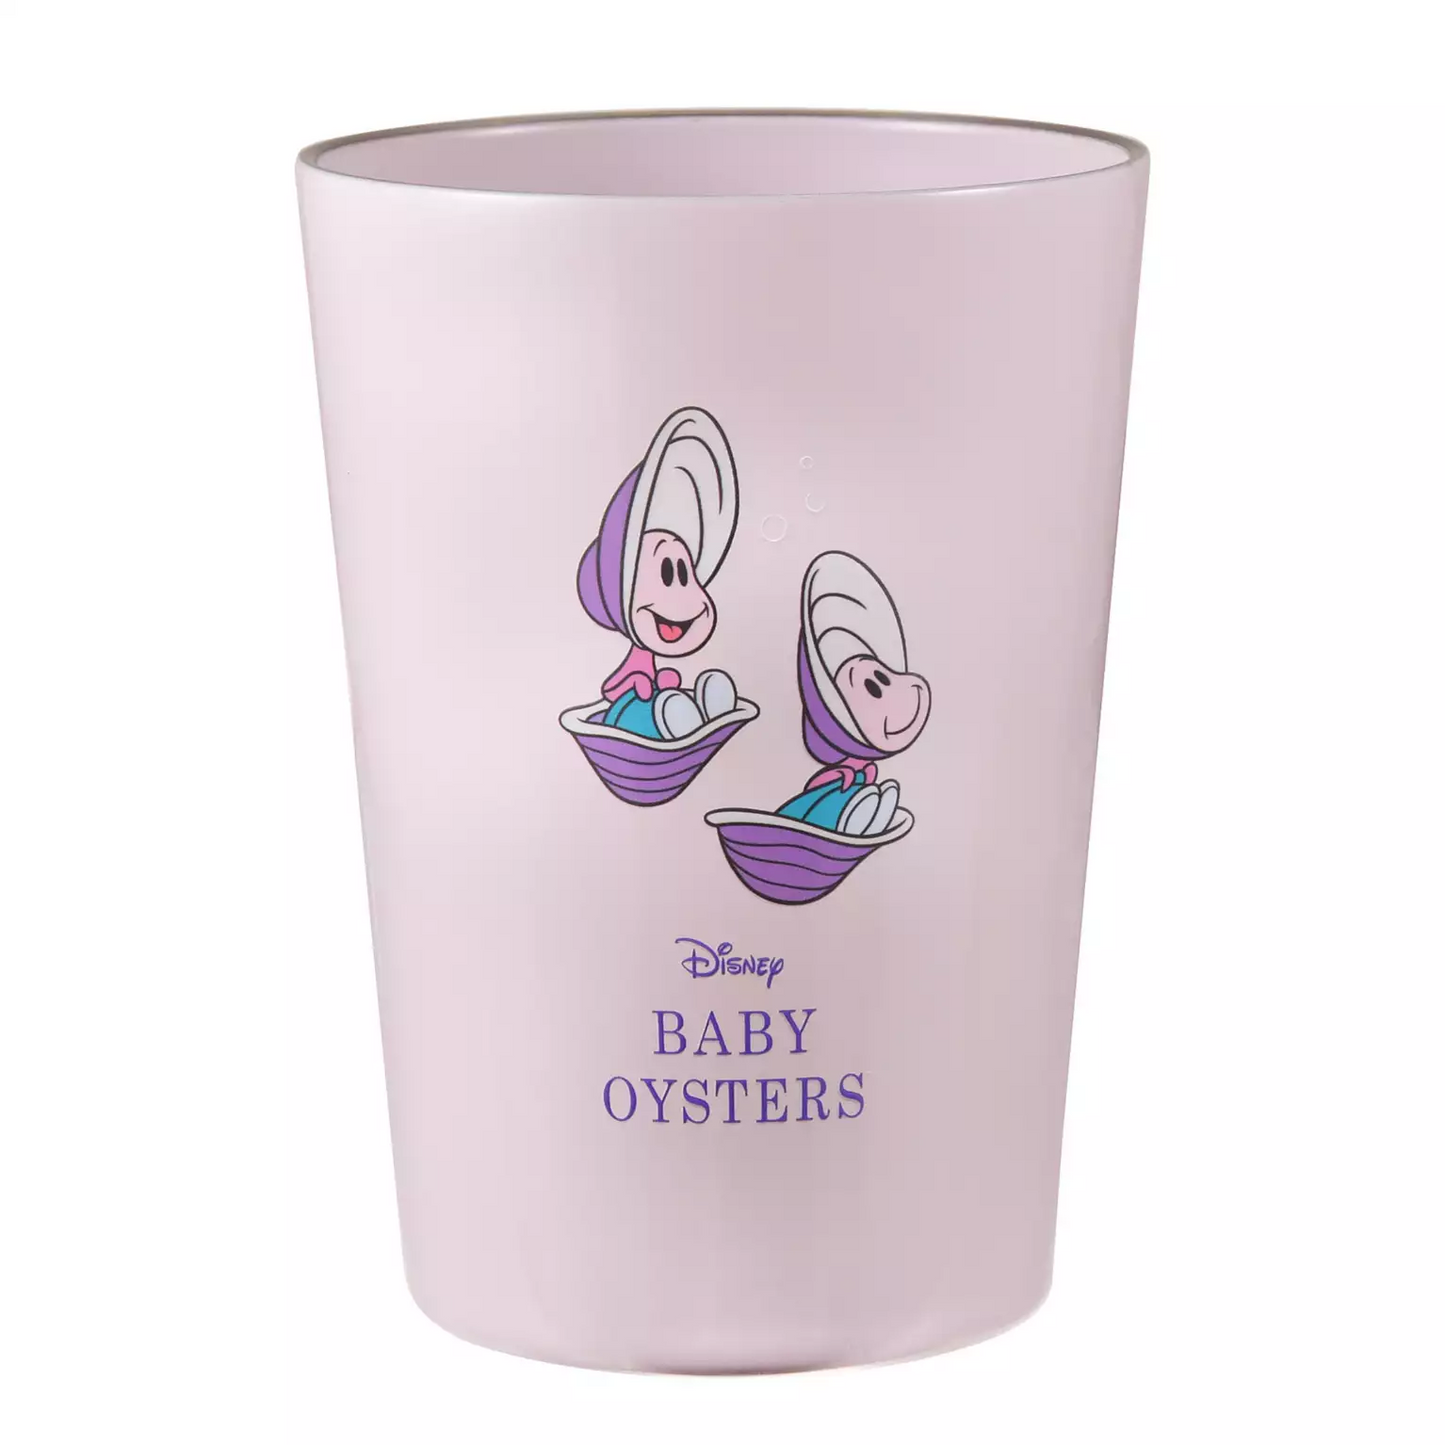 SDJ - Baby Oysters - Tumbler